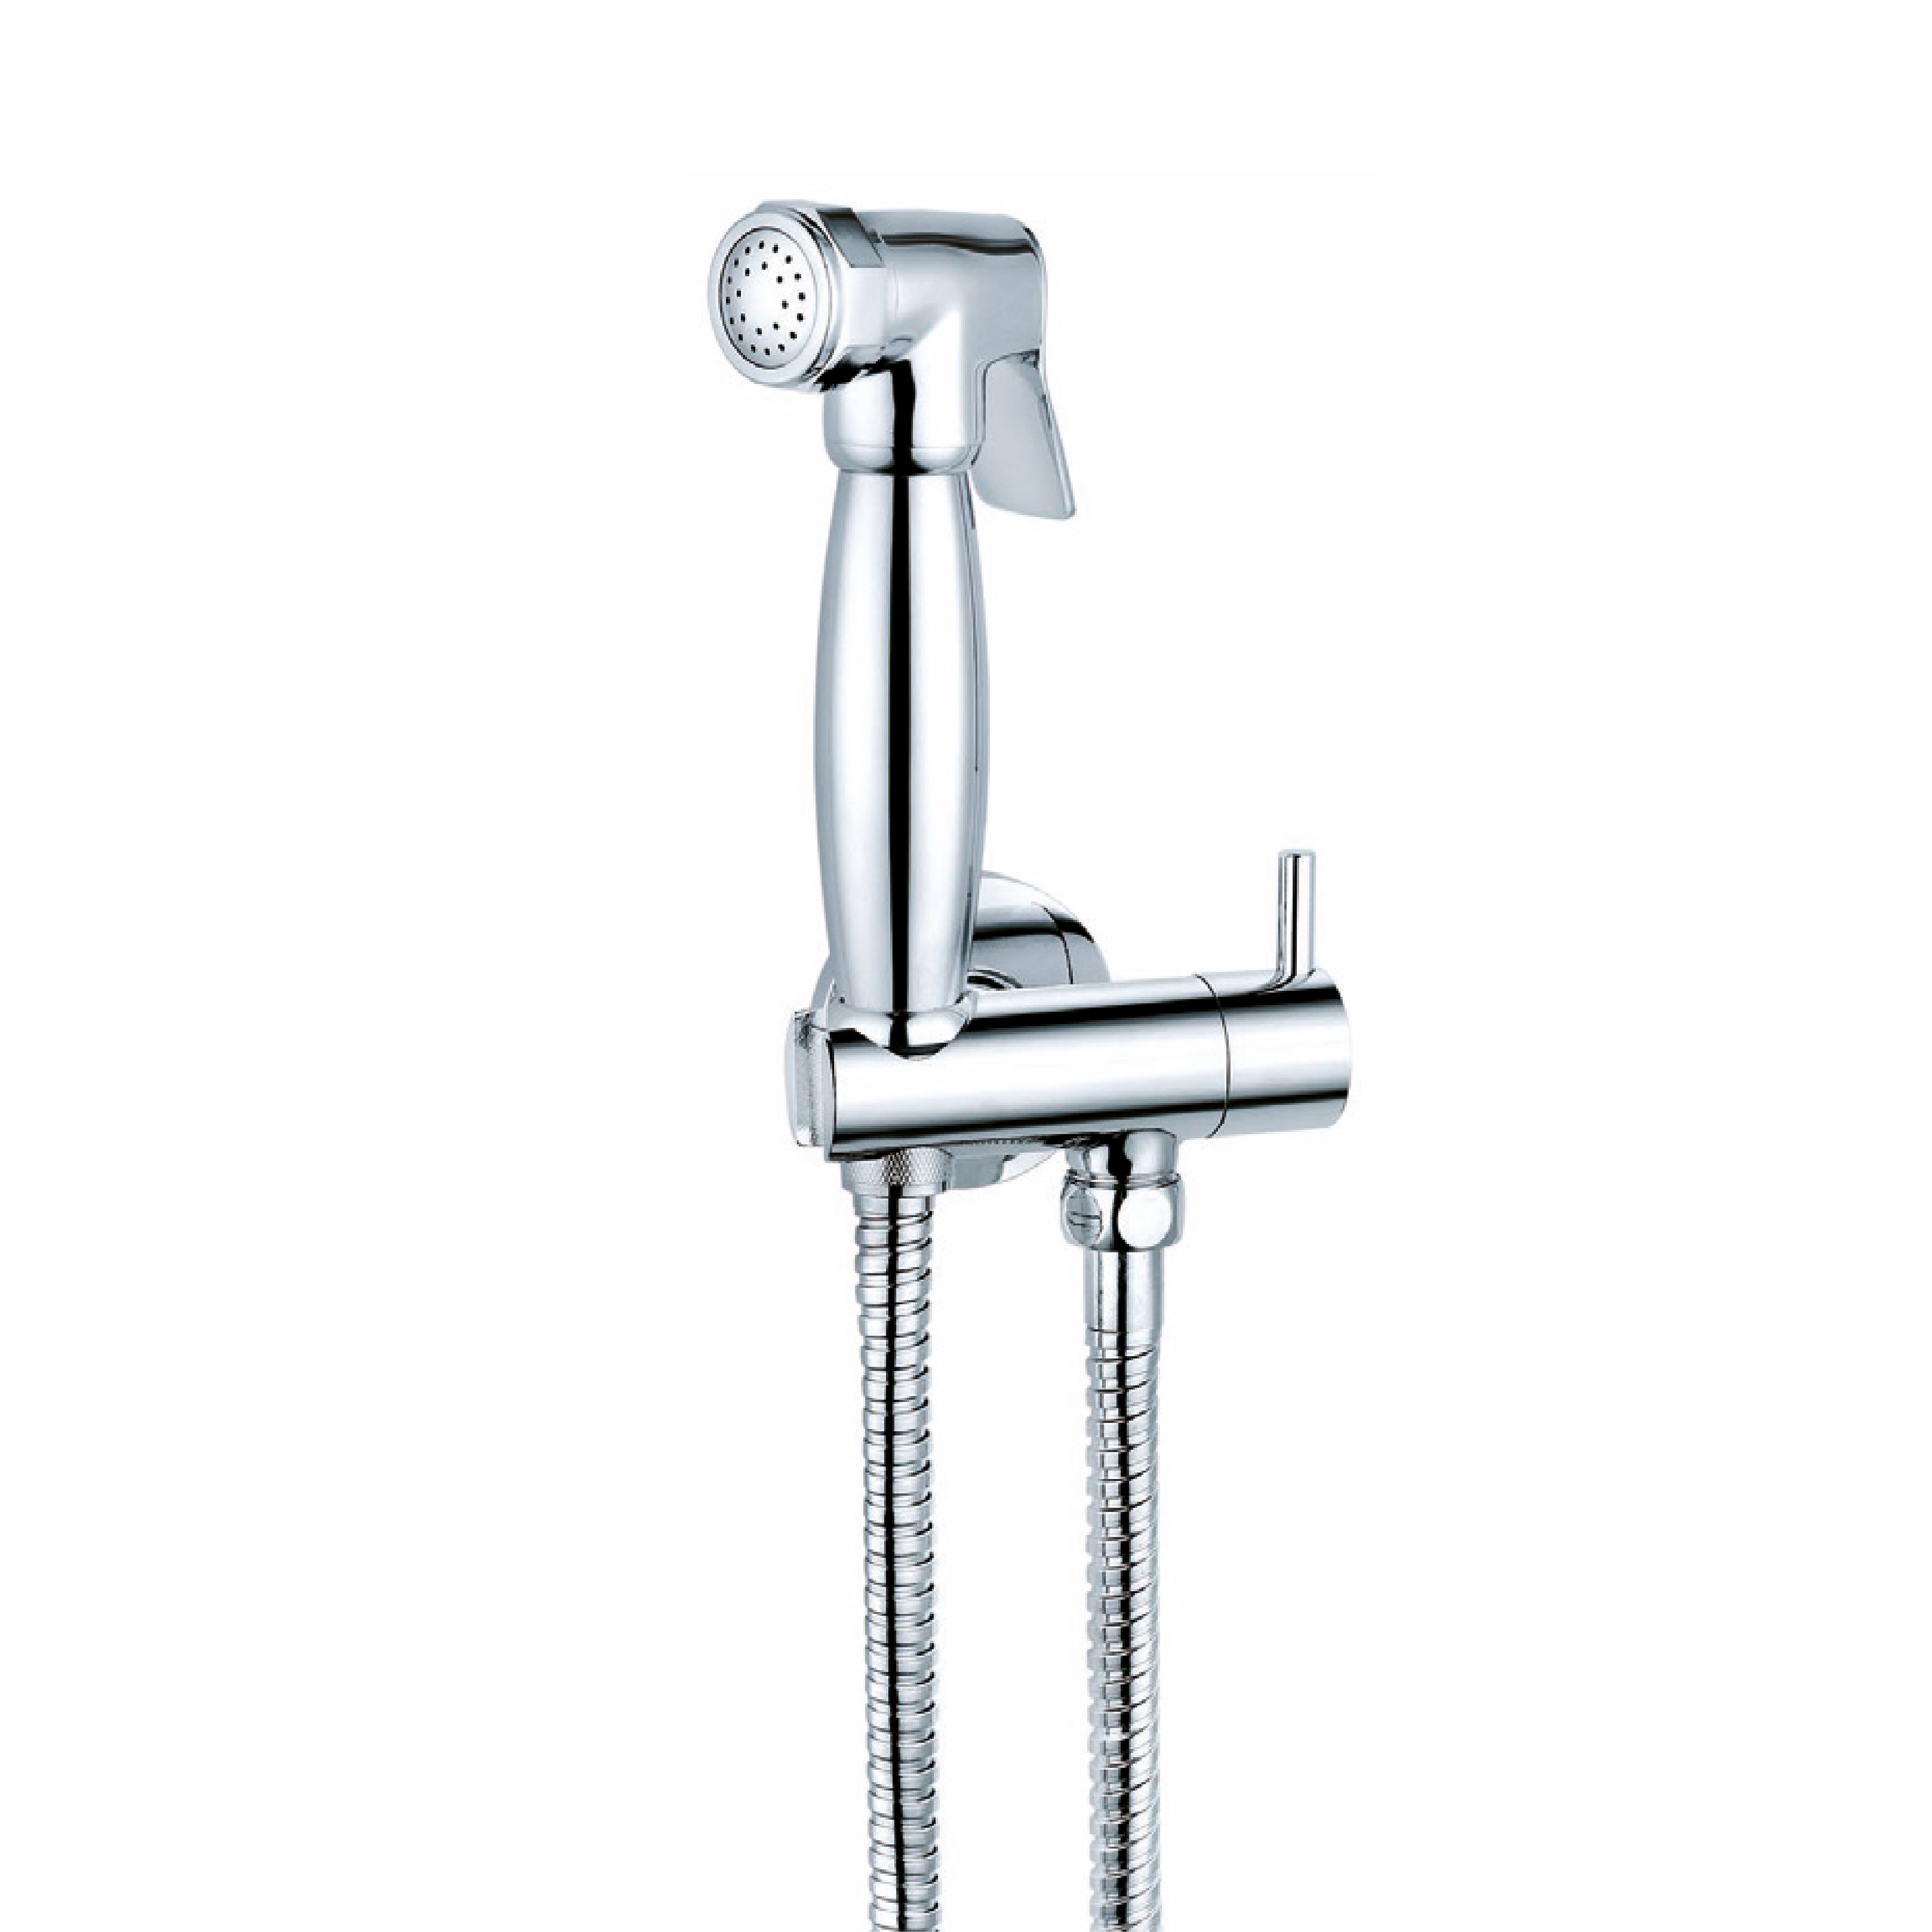 Douche Kit with Thermostatic Mixing Valve - Chrome Finish